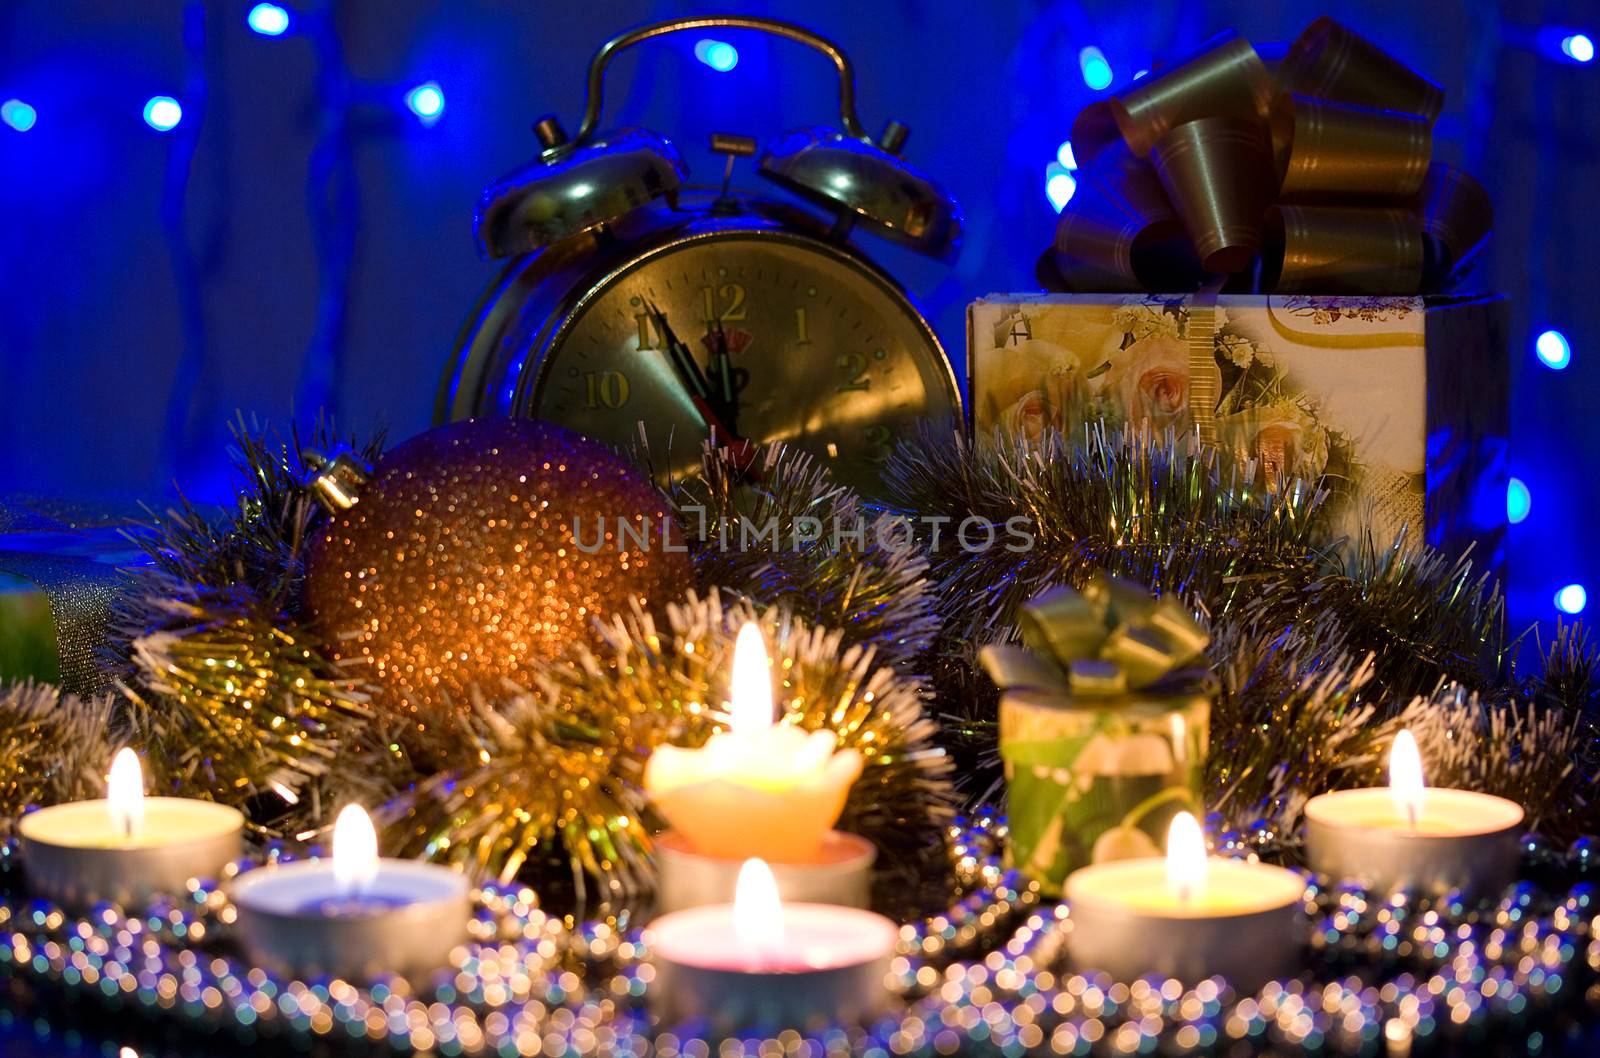 Candle on the background of the Christmas tree and gifts